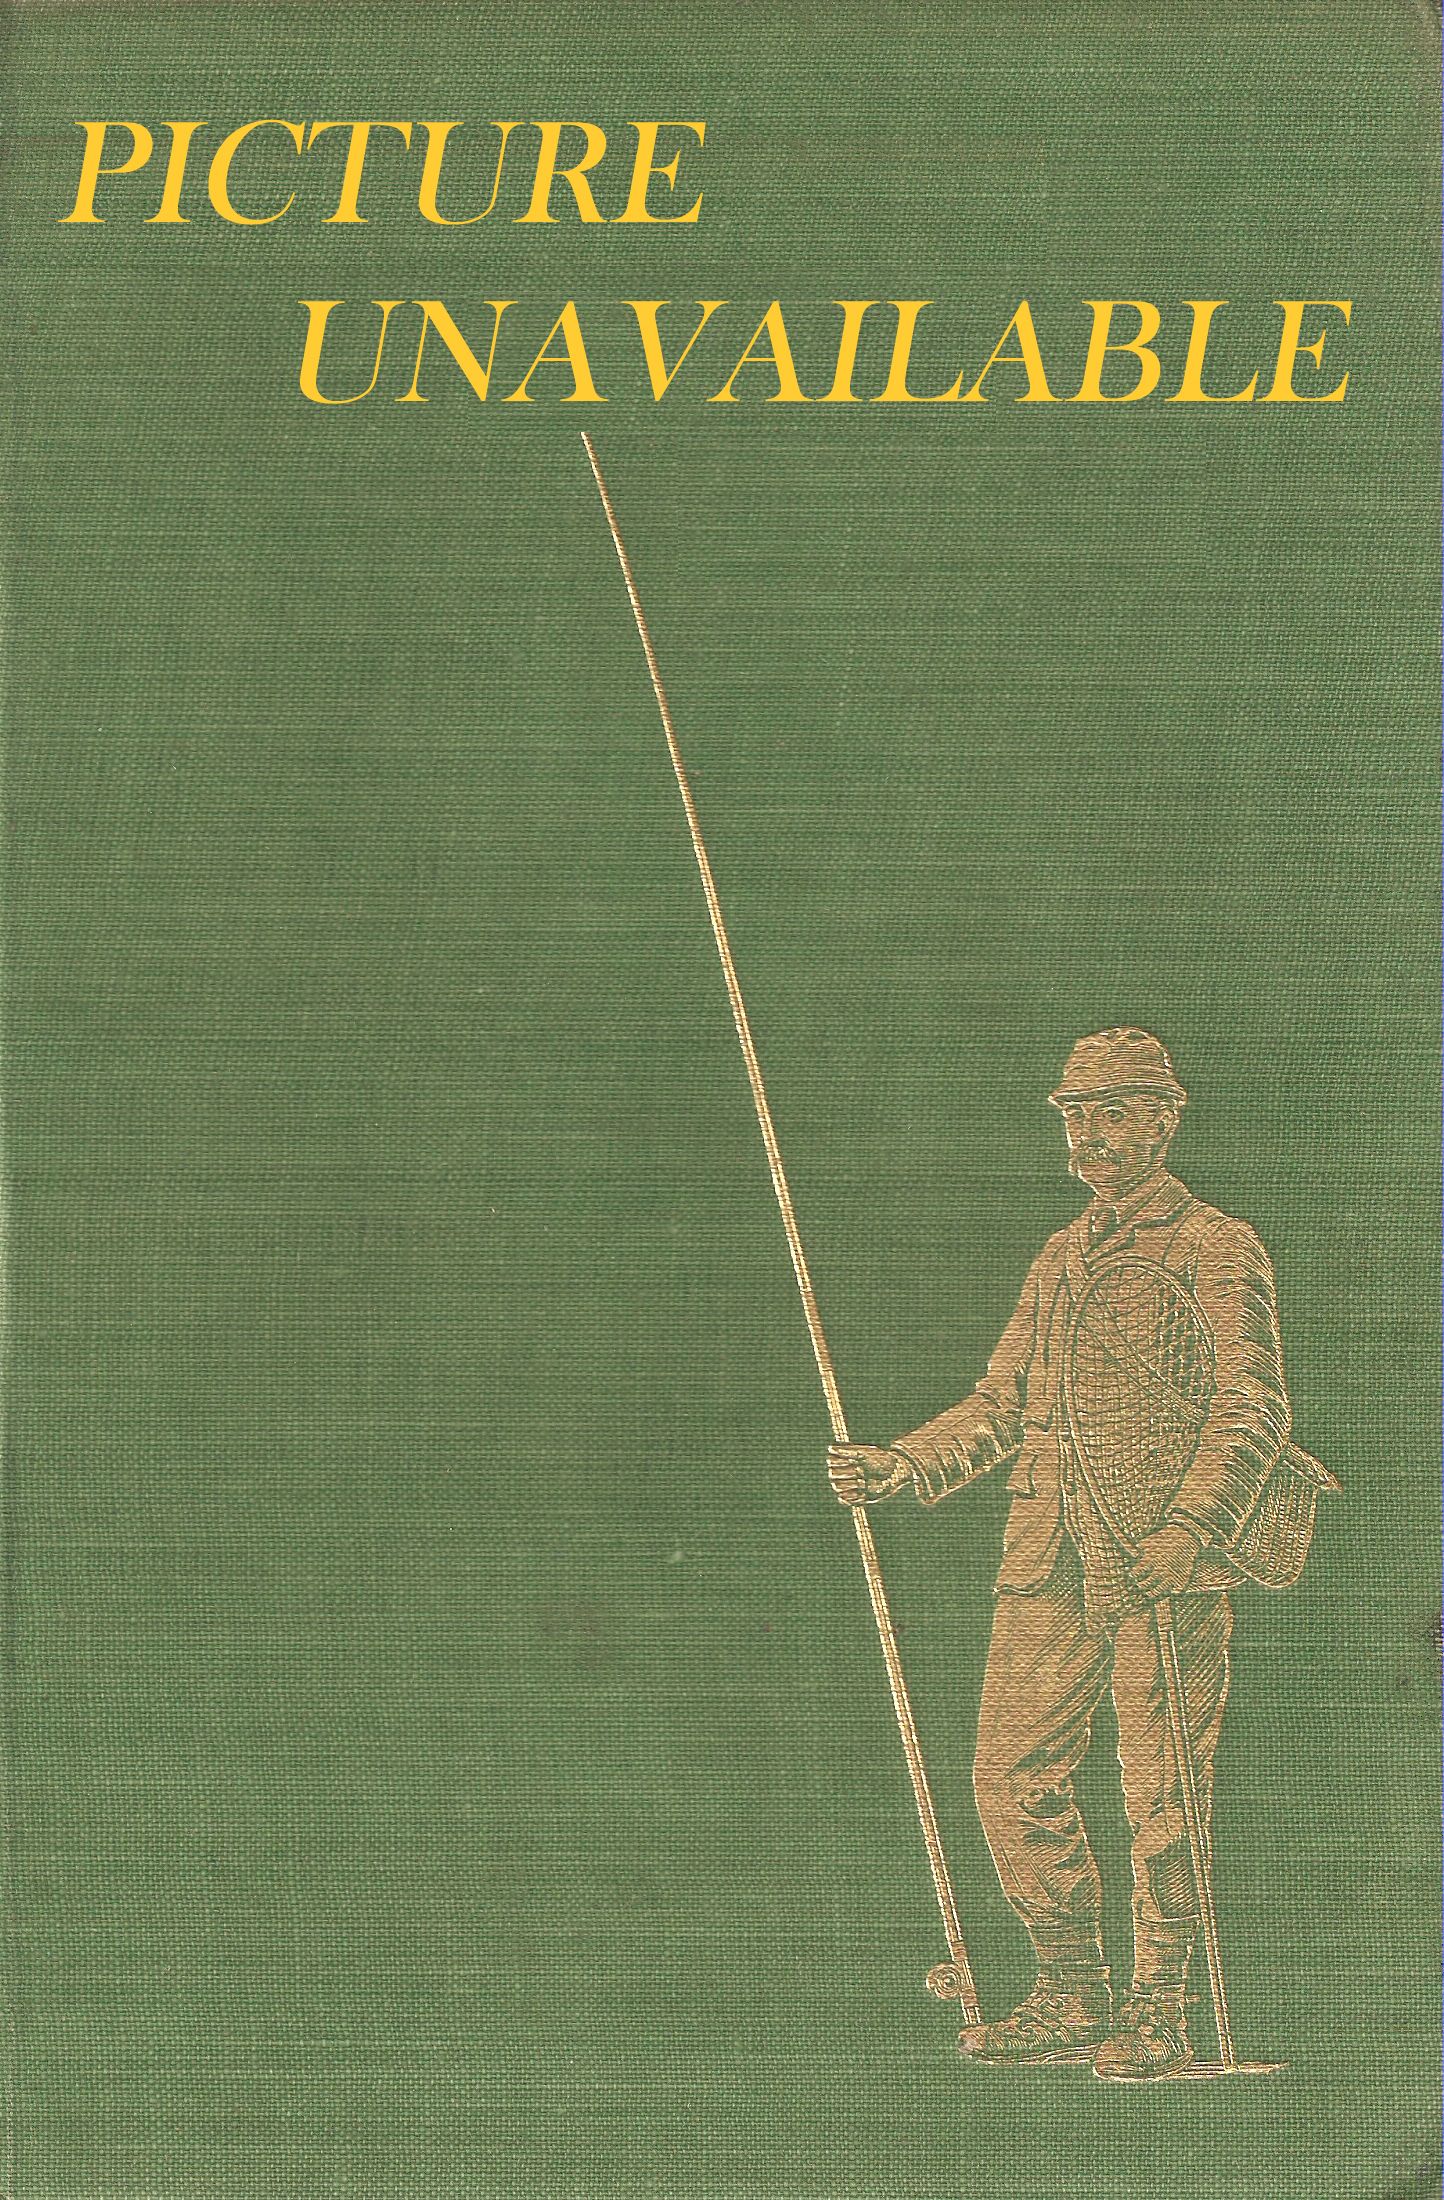 RETROSPECT: REMINISCENCES AND IMPRESSIONS OF A HUNTER-NATURALIST IN THREE  CONTINENTS 1851 - 1928. By Abel Chapman.